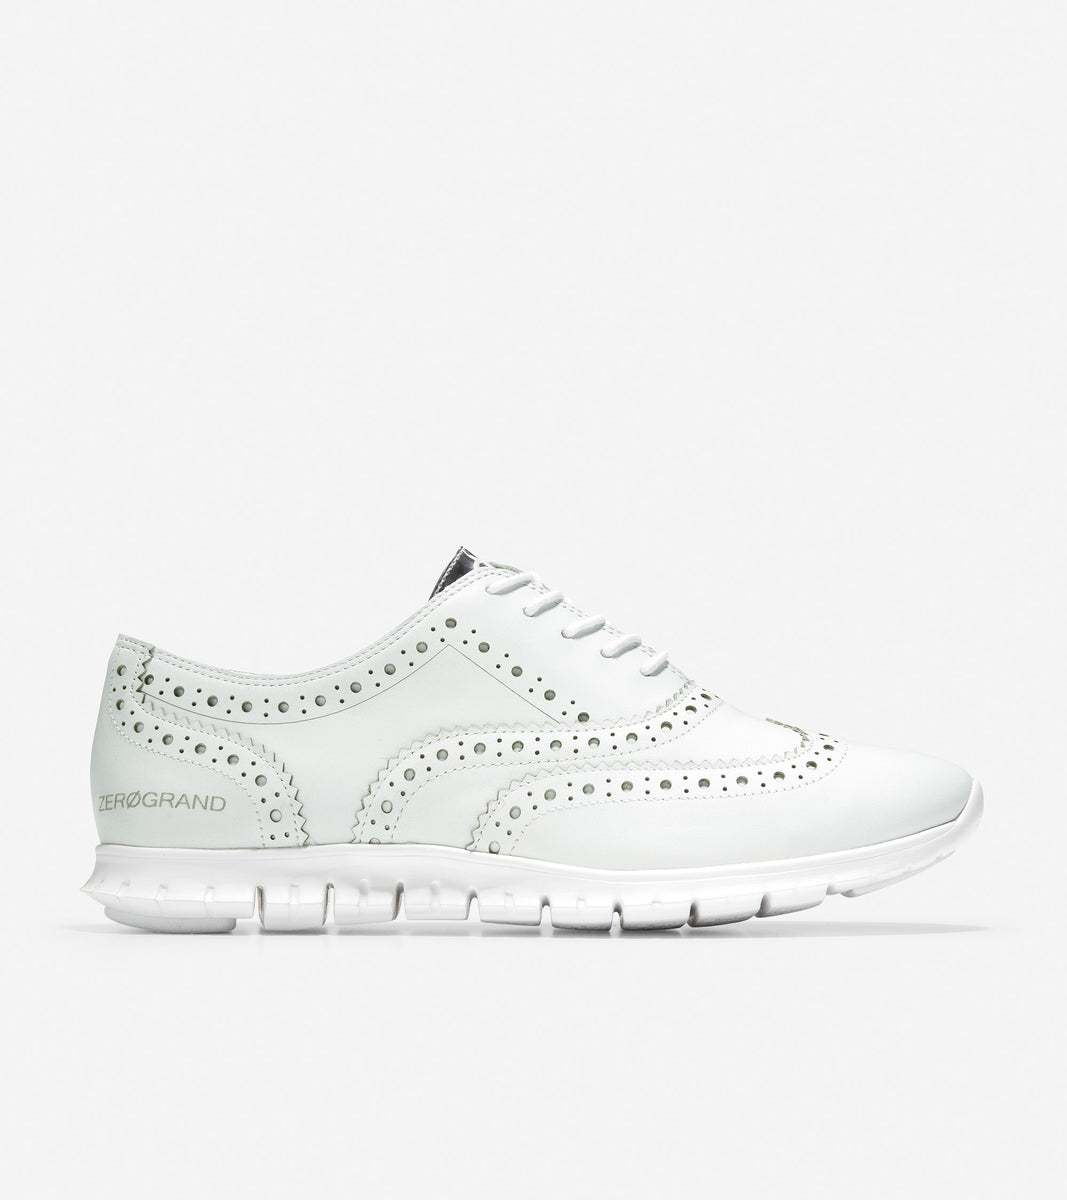 ColeHaan-ZERØGRAND Wingtip Oxford-w20385-Optic White Leather-Argento Leather